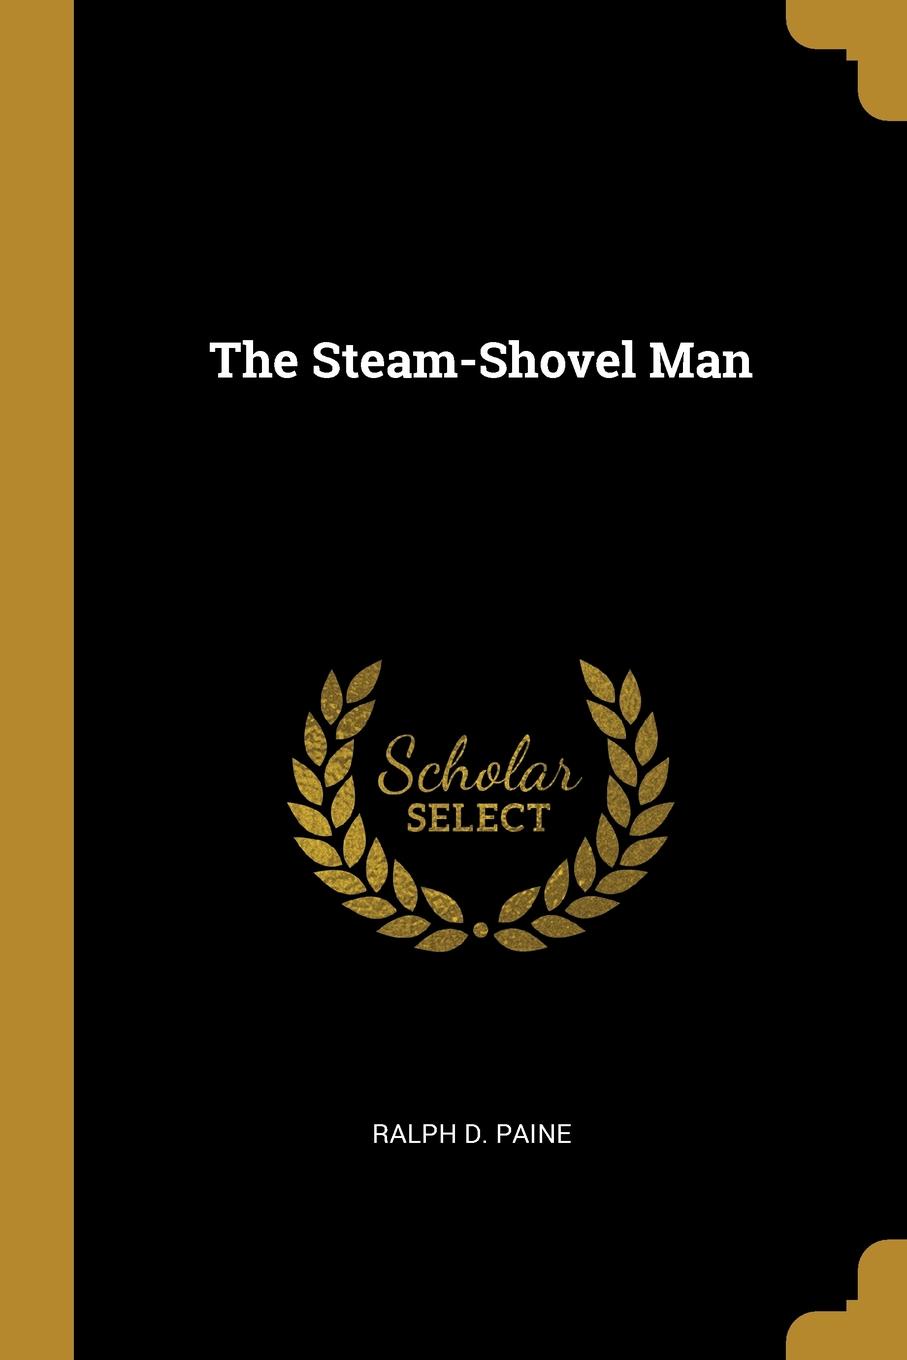 And the steam shovel фото 7